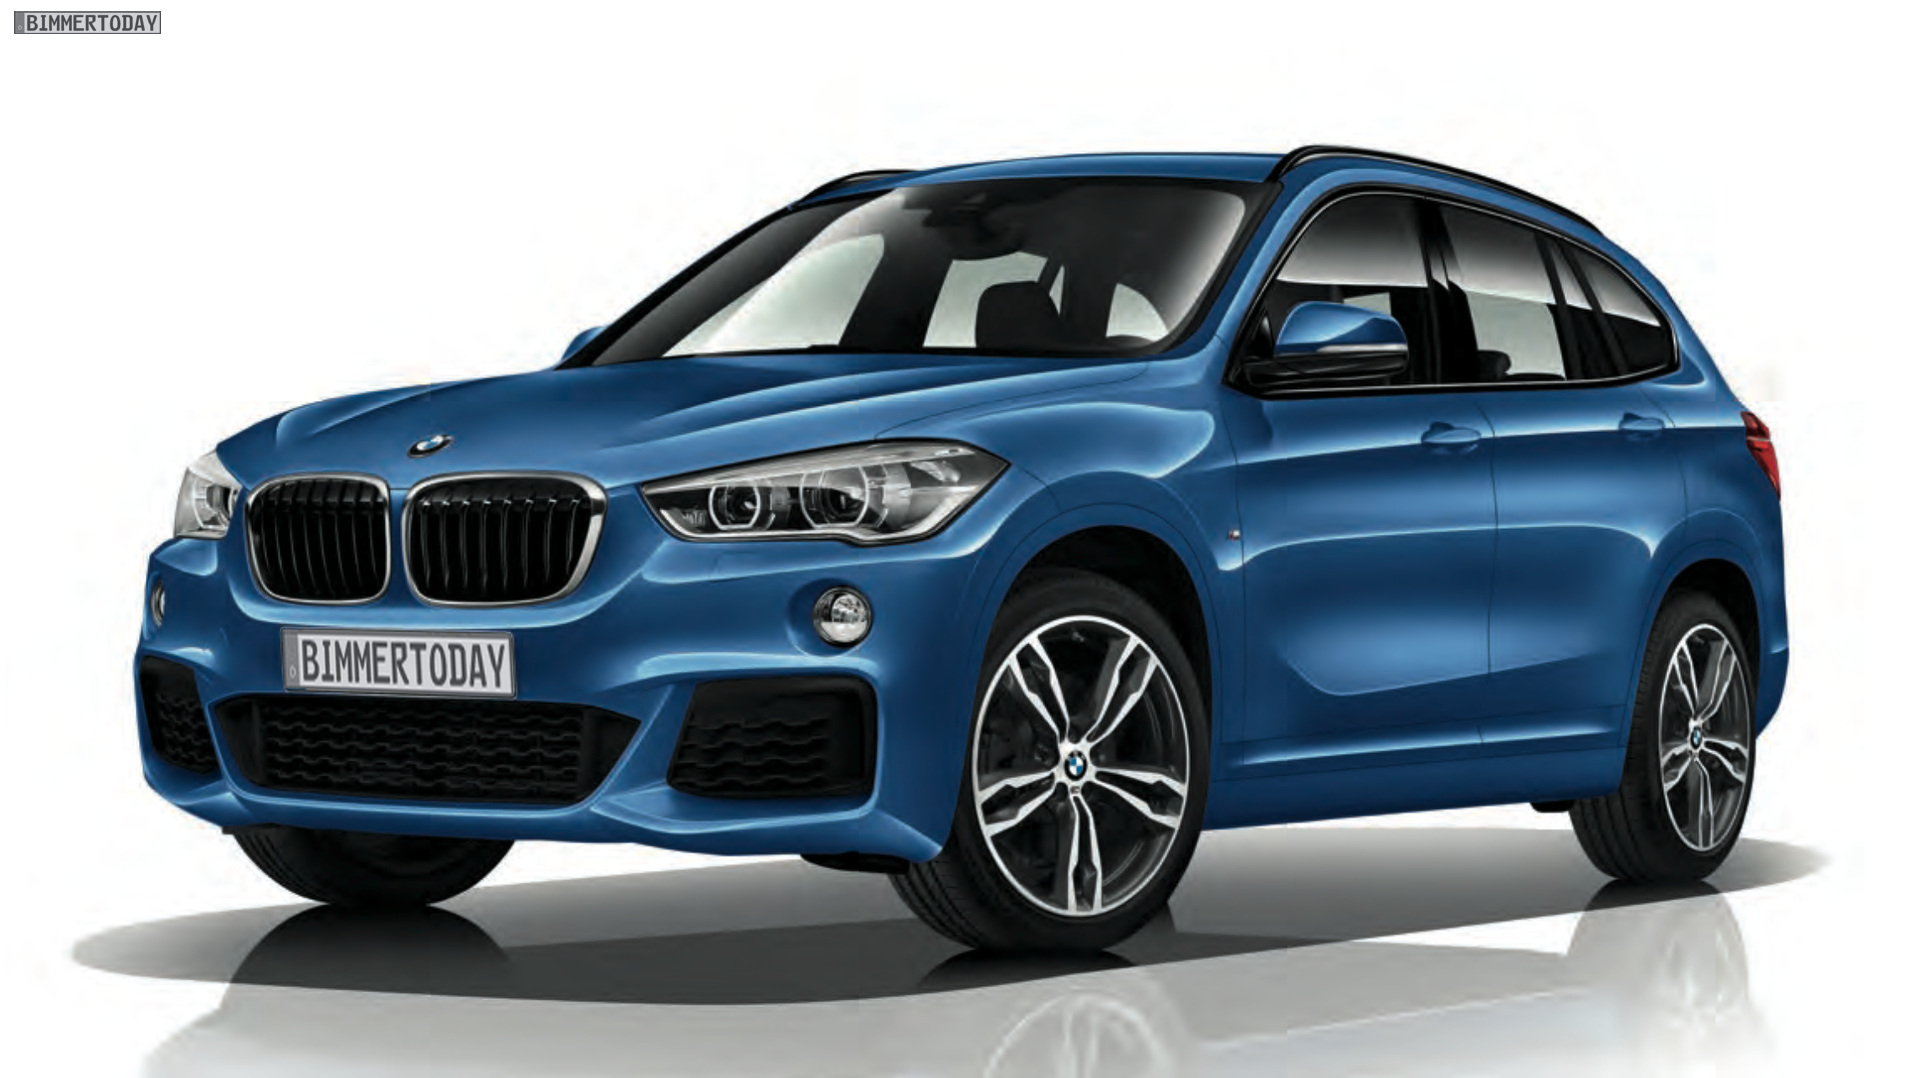 2016 BMW X1 M-Sport Package images surface